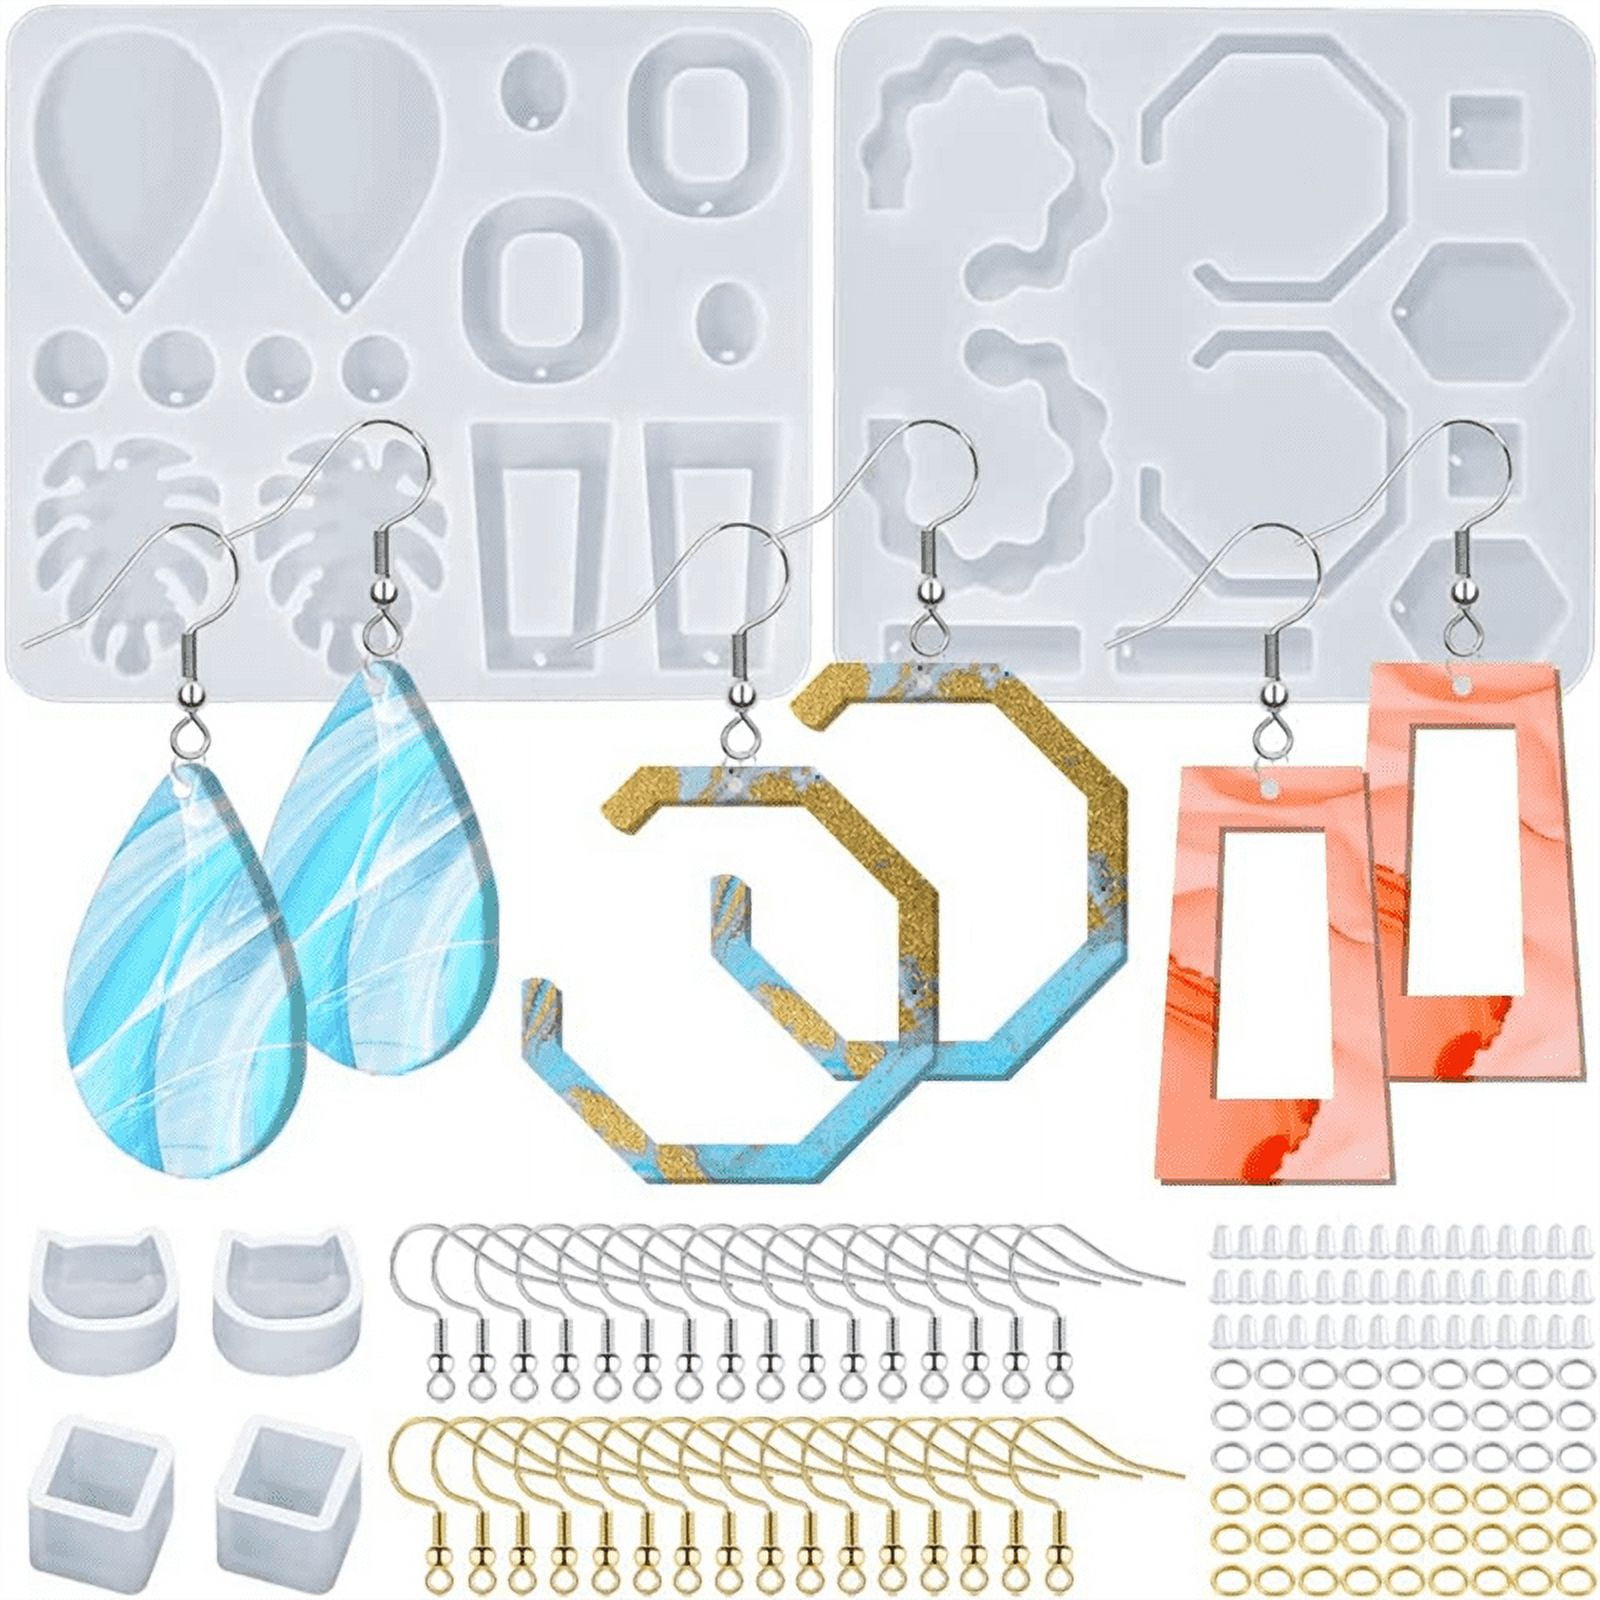 Resin Earring Mold Jewelry Earring Silicone Molds for Epoxy Resin Casting Resin Hoop Earrings Mould for DIY Jewelry 6b6f1639 1db2 4429 bcc7 4eb3ecb67028.0466b417a6359038139bb5313736ee73